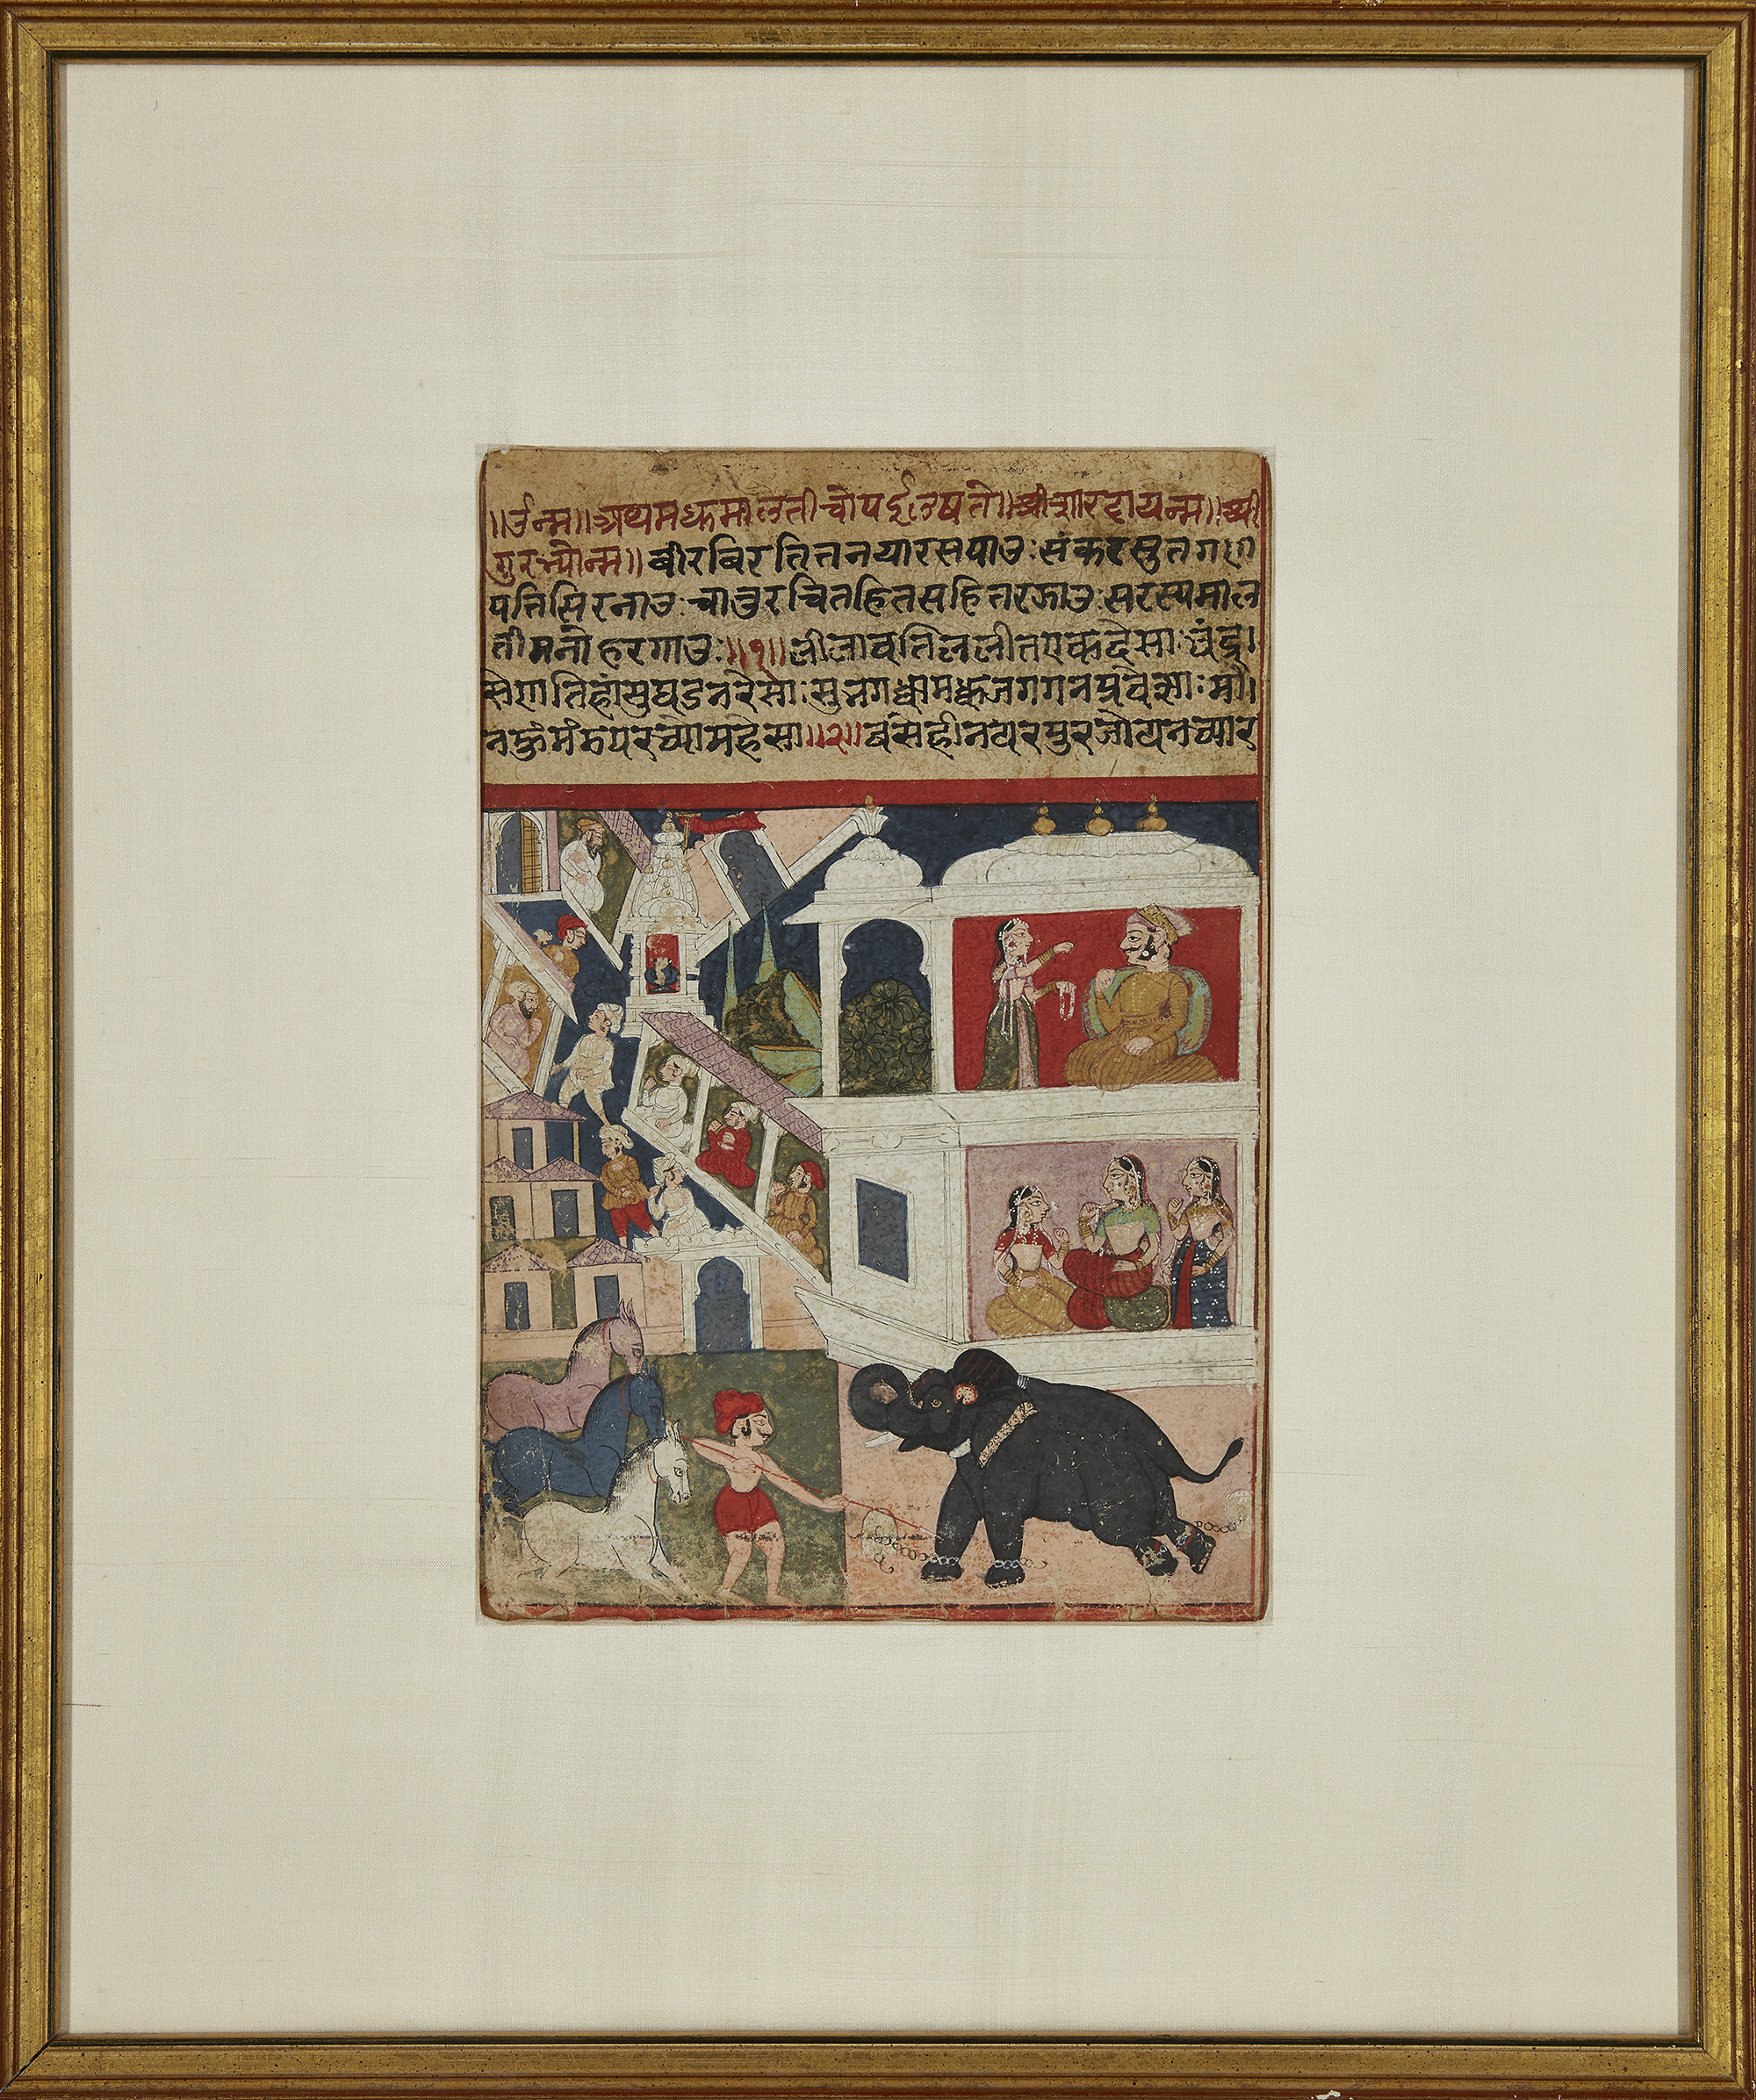 An illustrated folio, possibly from the Kathakalpataru, Marwar, Rajasthan, first half 17th centu... - Image 3 of 3